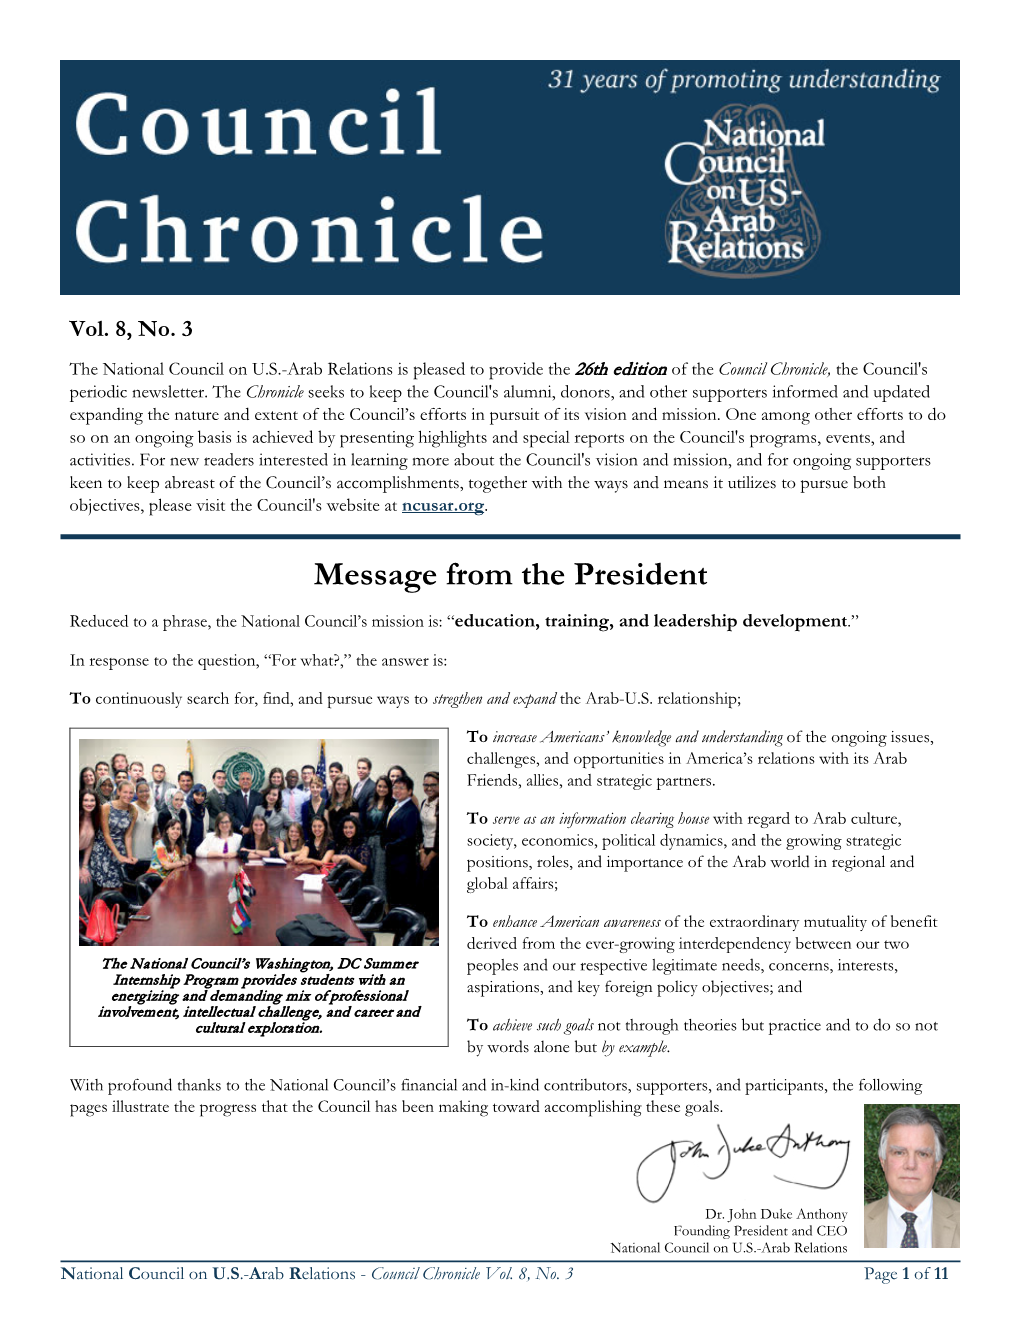 Council Chronicle Vol. 8, No. 3 Page 1 of 11